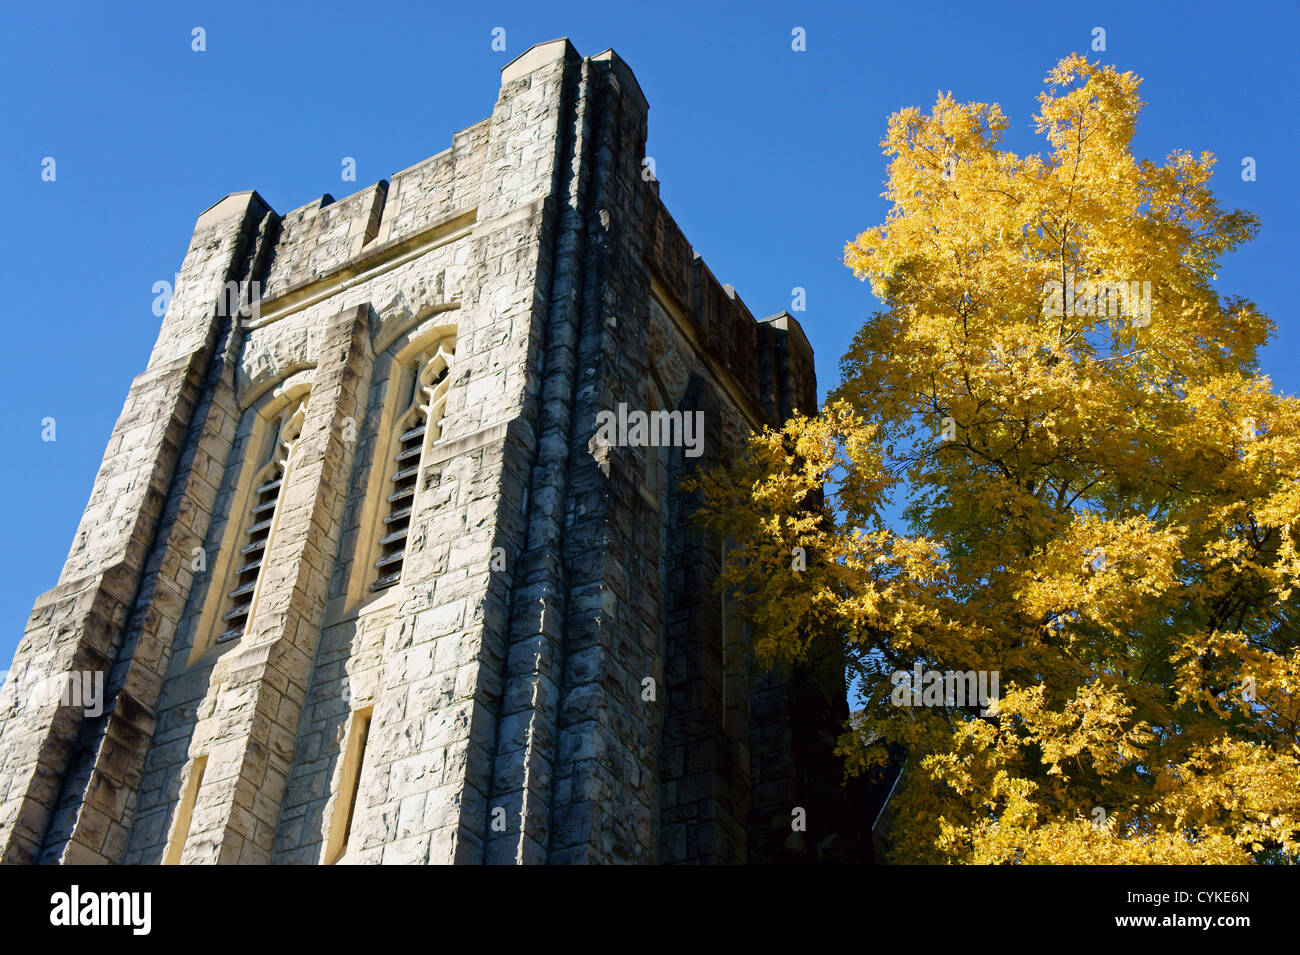 Ryerson-United-Church-and-golden-leafed-